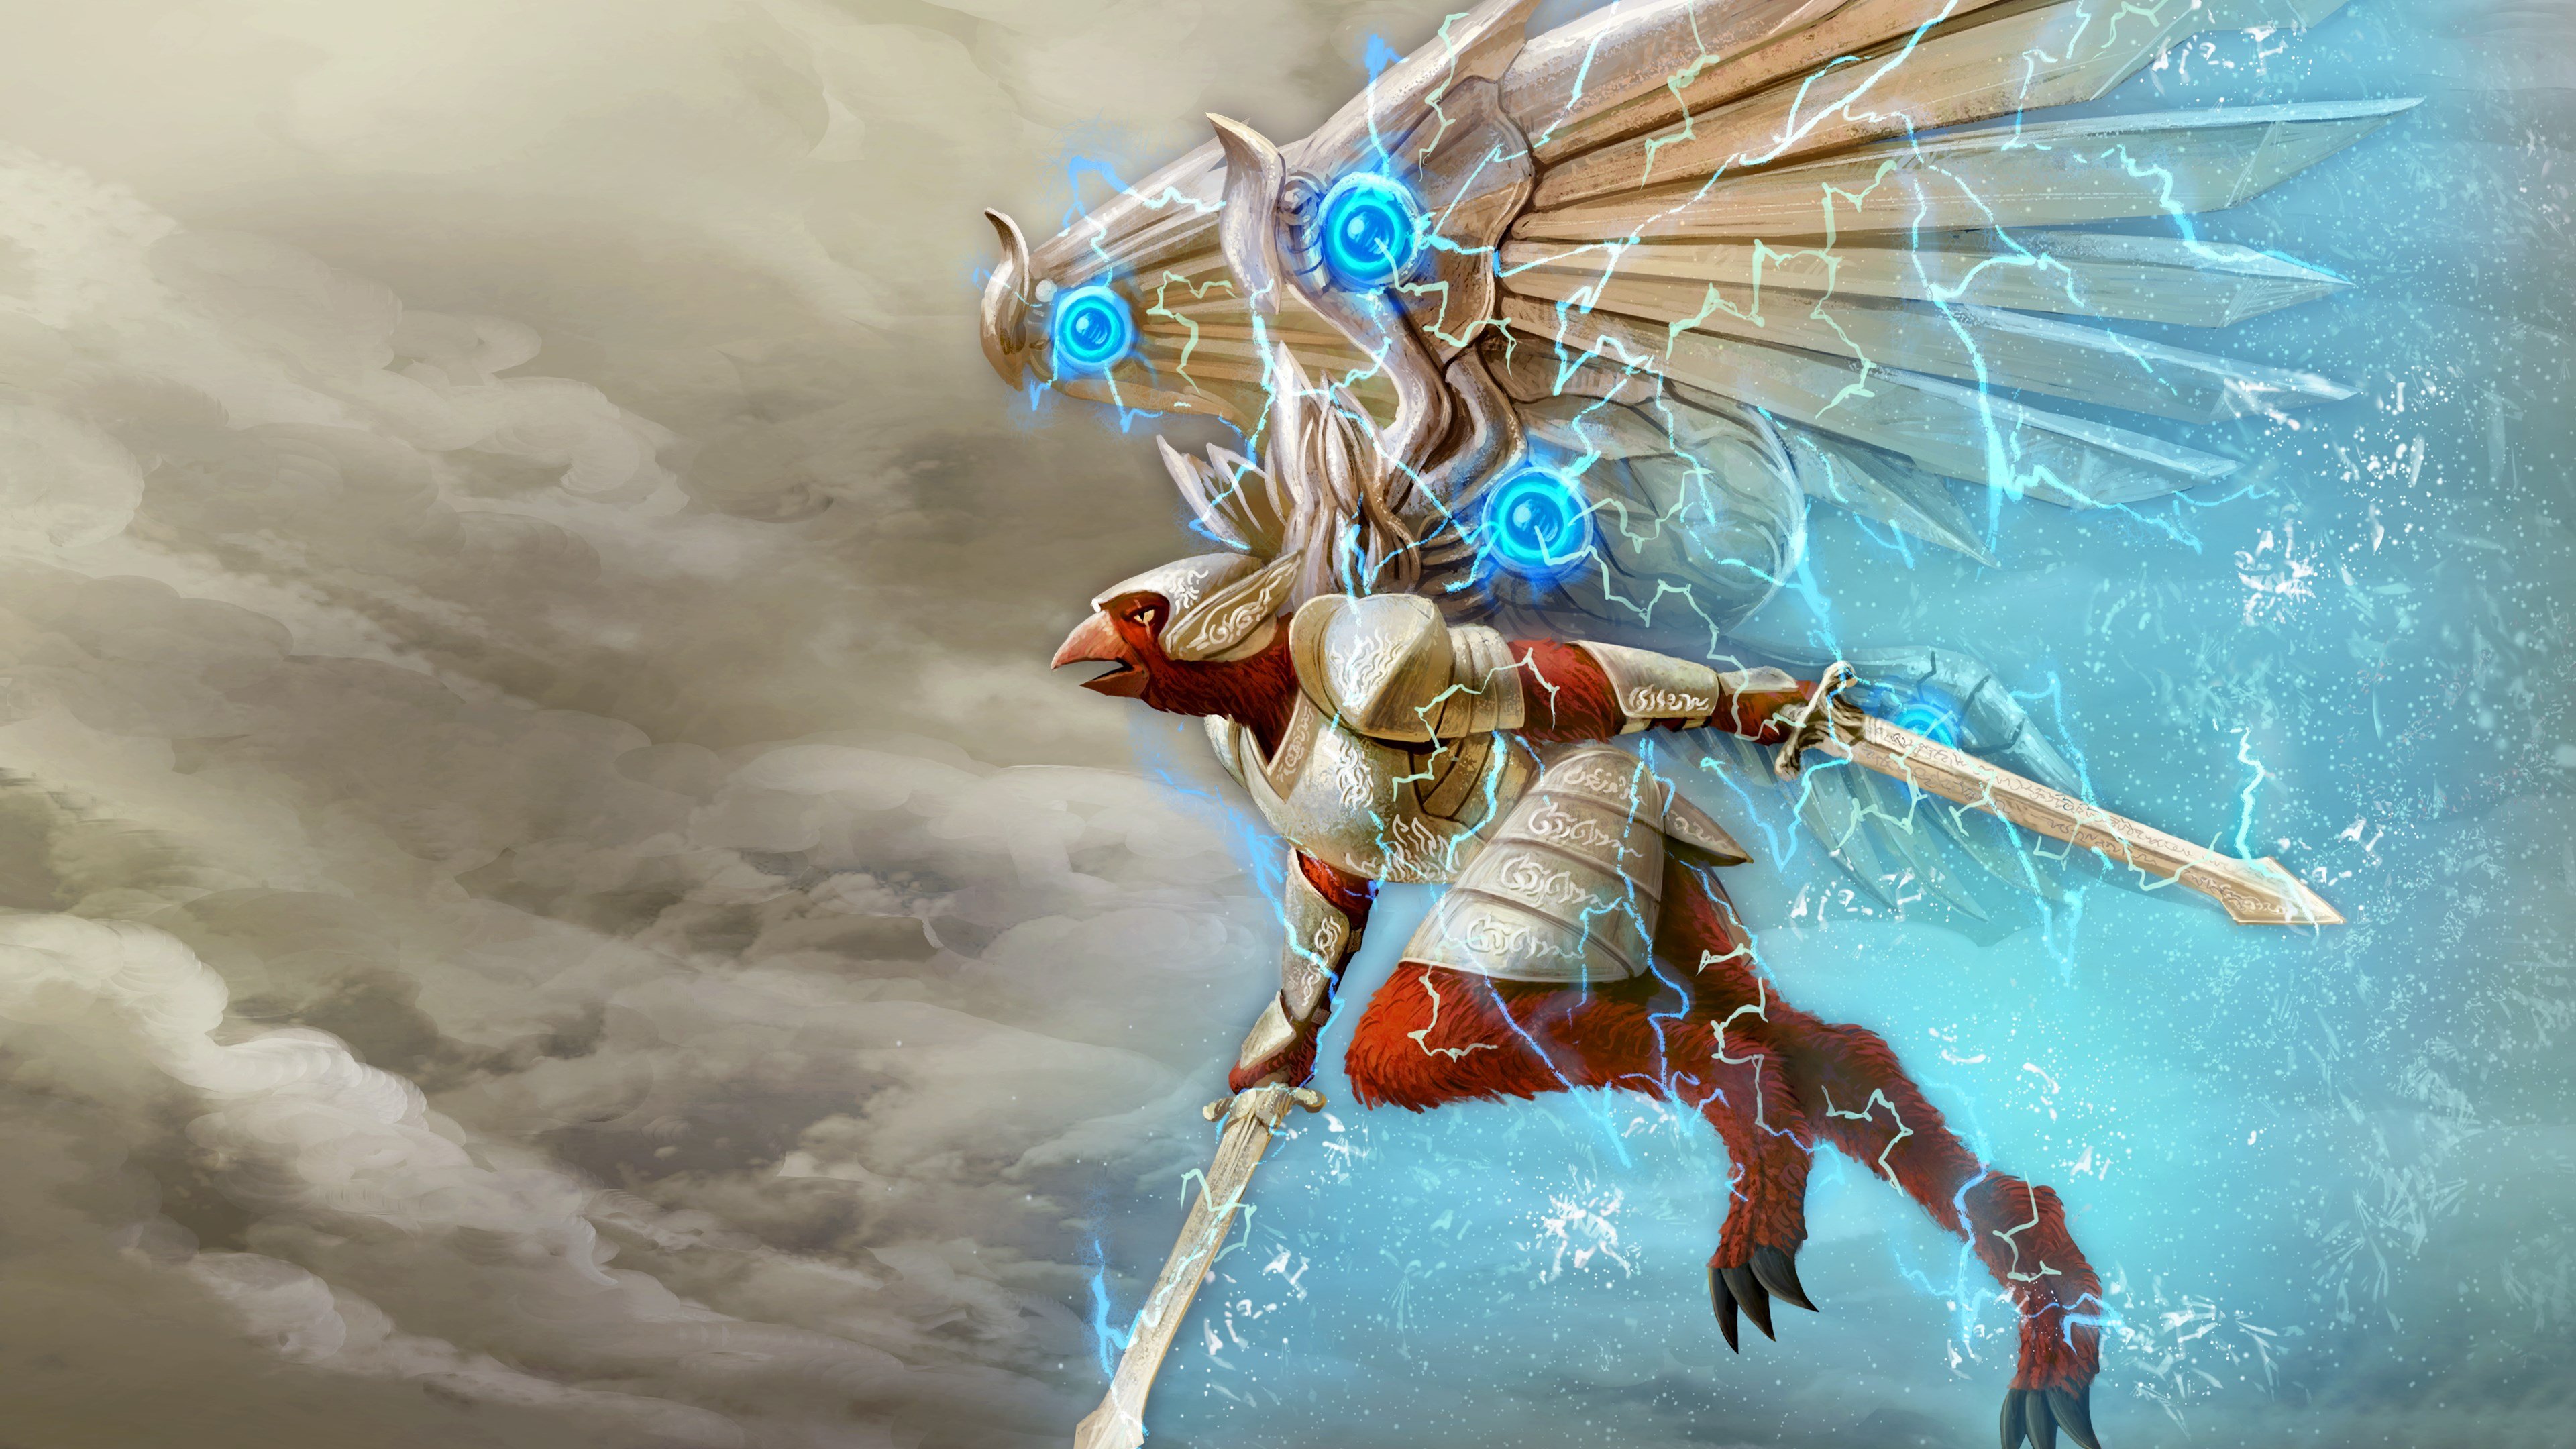 Krut The Mythic Wings cover image